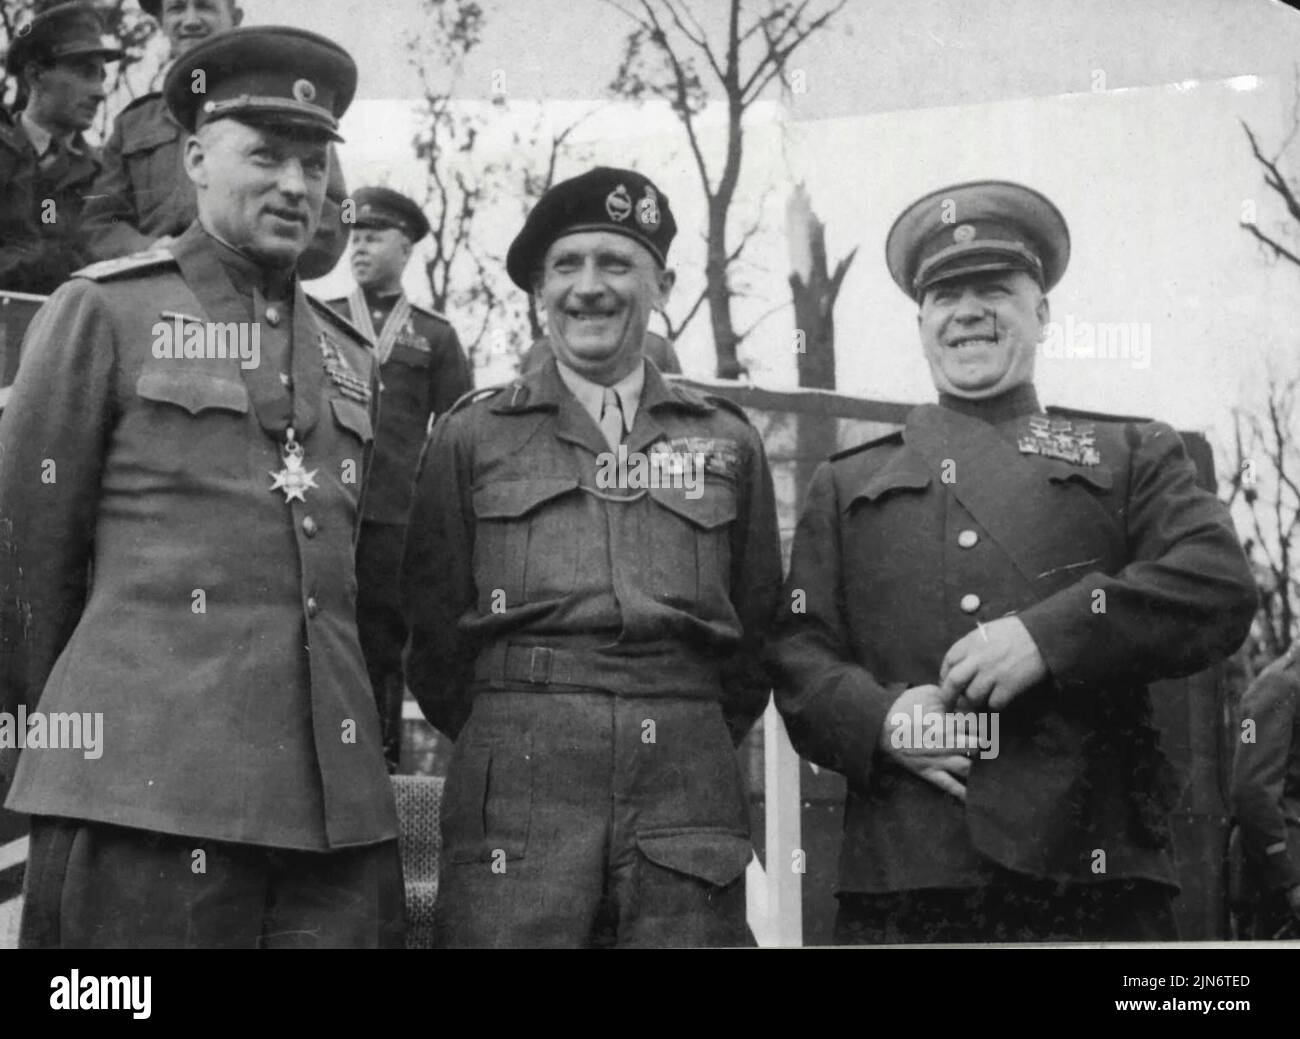 Monty Decorates Red Army Generals - (left to right) - Marshal Rokossovsky, wearing the neck band of the order of knight commander of the bath, Field - Marshal Montgomery, and Marshal Zhukov, wearing the sash of the order of knight grand cross of the order of the bath, on the Rostrom after taking the salute at the March past of Grenadier guards.Field-Marshal Montgomery decorated Marshal Zhukcy with the order of the knight Grand cross of the order of the bath, and Marshal Rokossovsky with knight commander of the bath, at a ceremonial parade in Berli, yesterday, July 12. Montgomery also invested Stock Photo